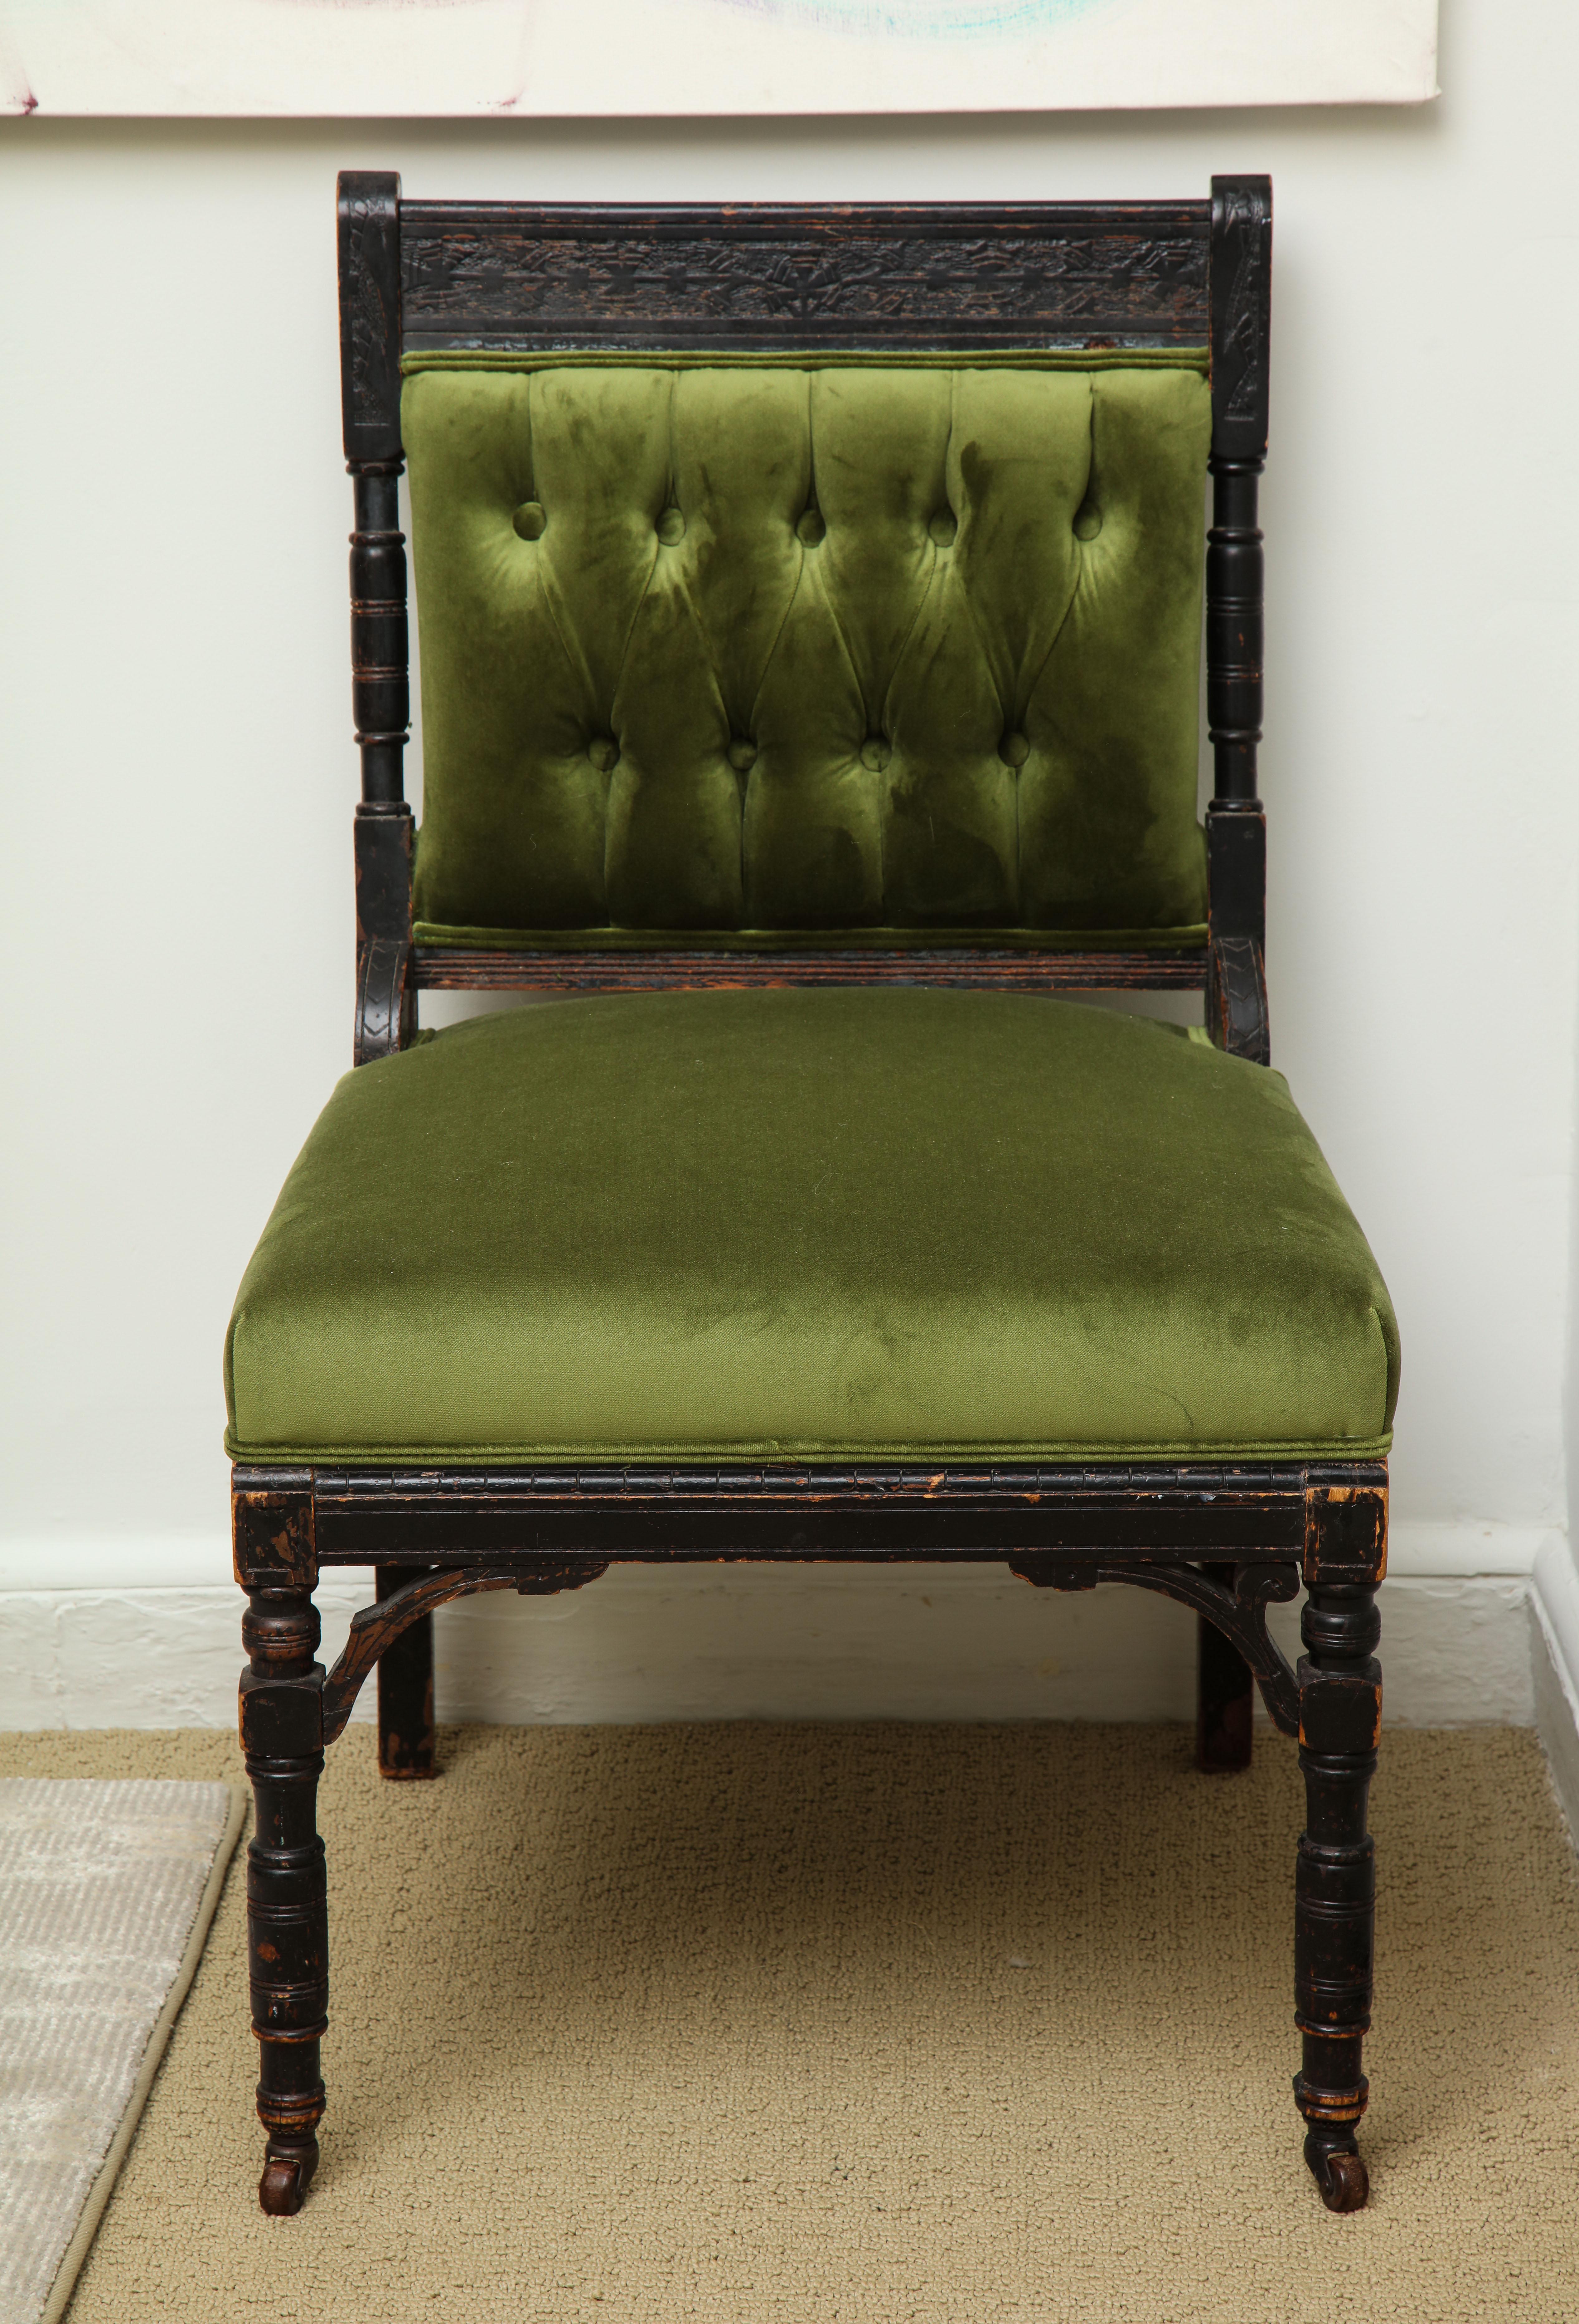 The Medieval chair is from a castle in Ireland. It was reupholstered with green velvet and it has all the original components, such as the wood and wheels.
There is visible wear and tear due to age and use.
The proportions of the chair is perfect